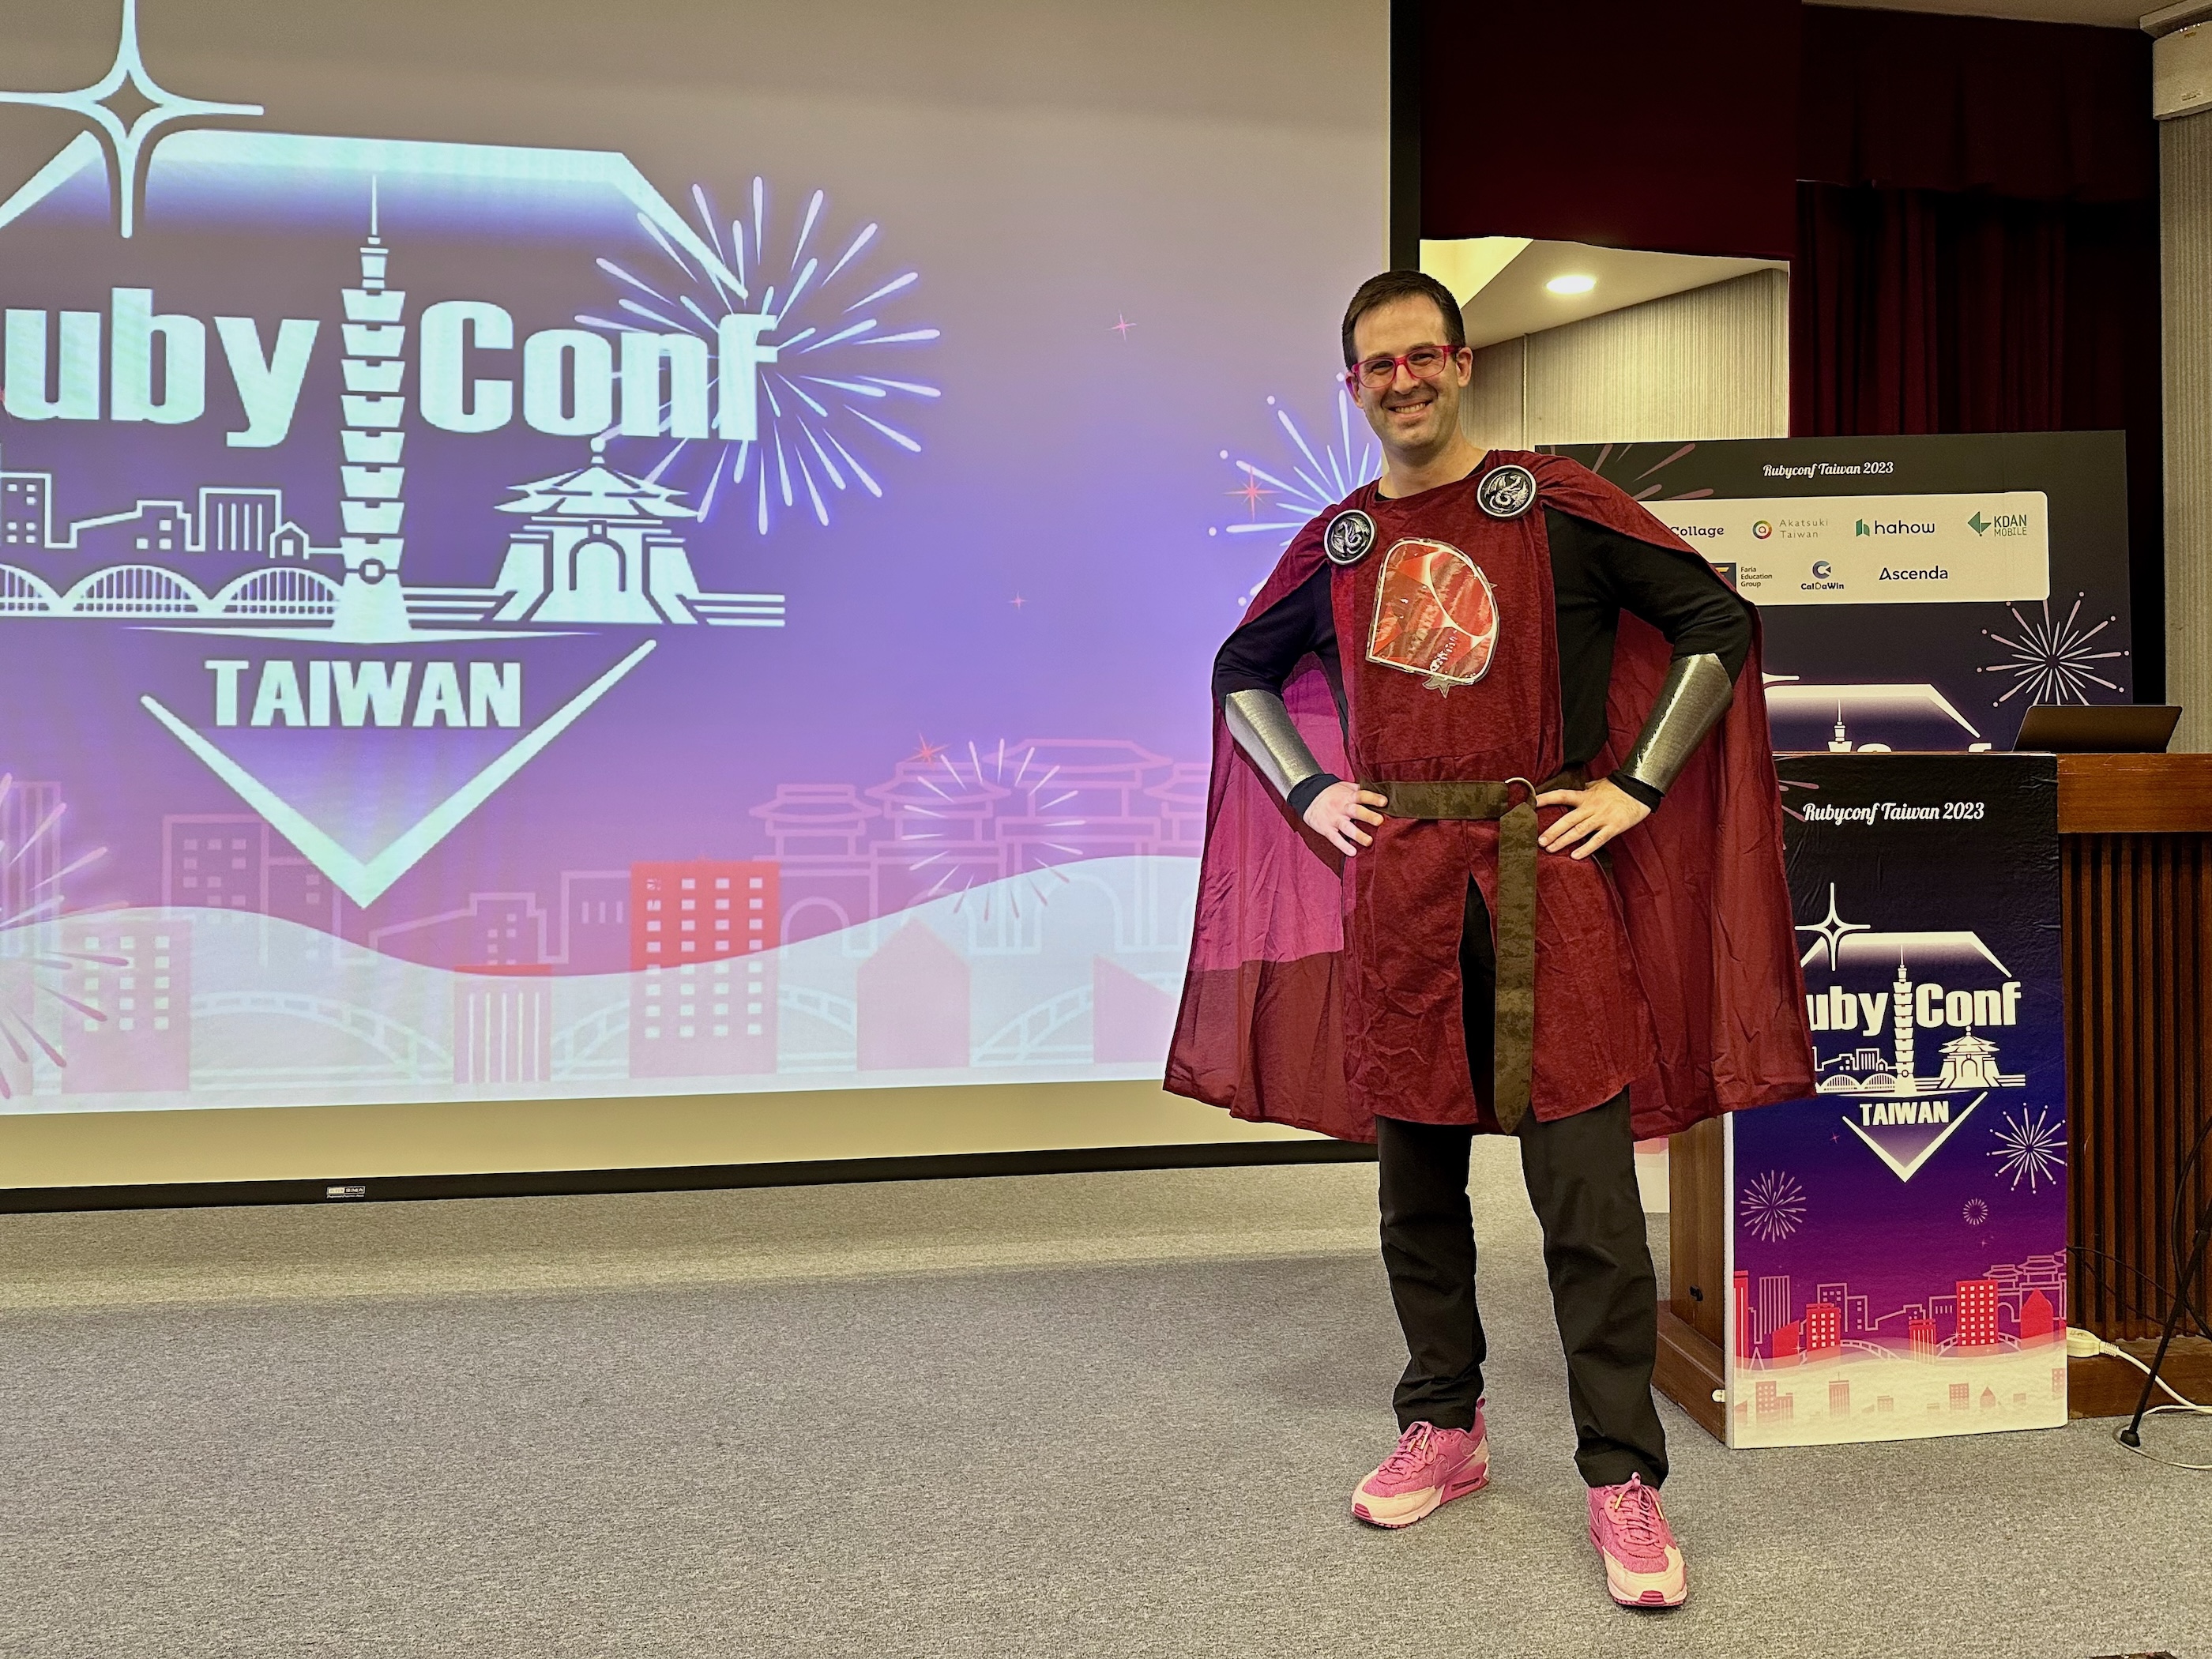 After “Quest of the Rubyist” at RubyConf Taiwan 2023